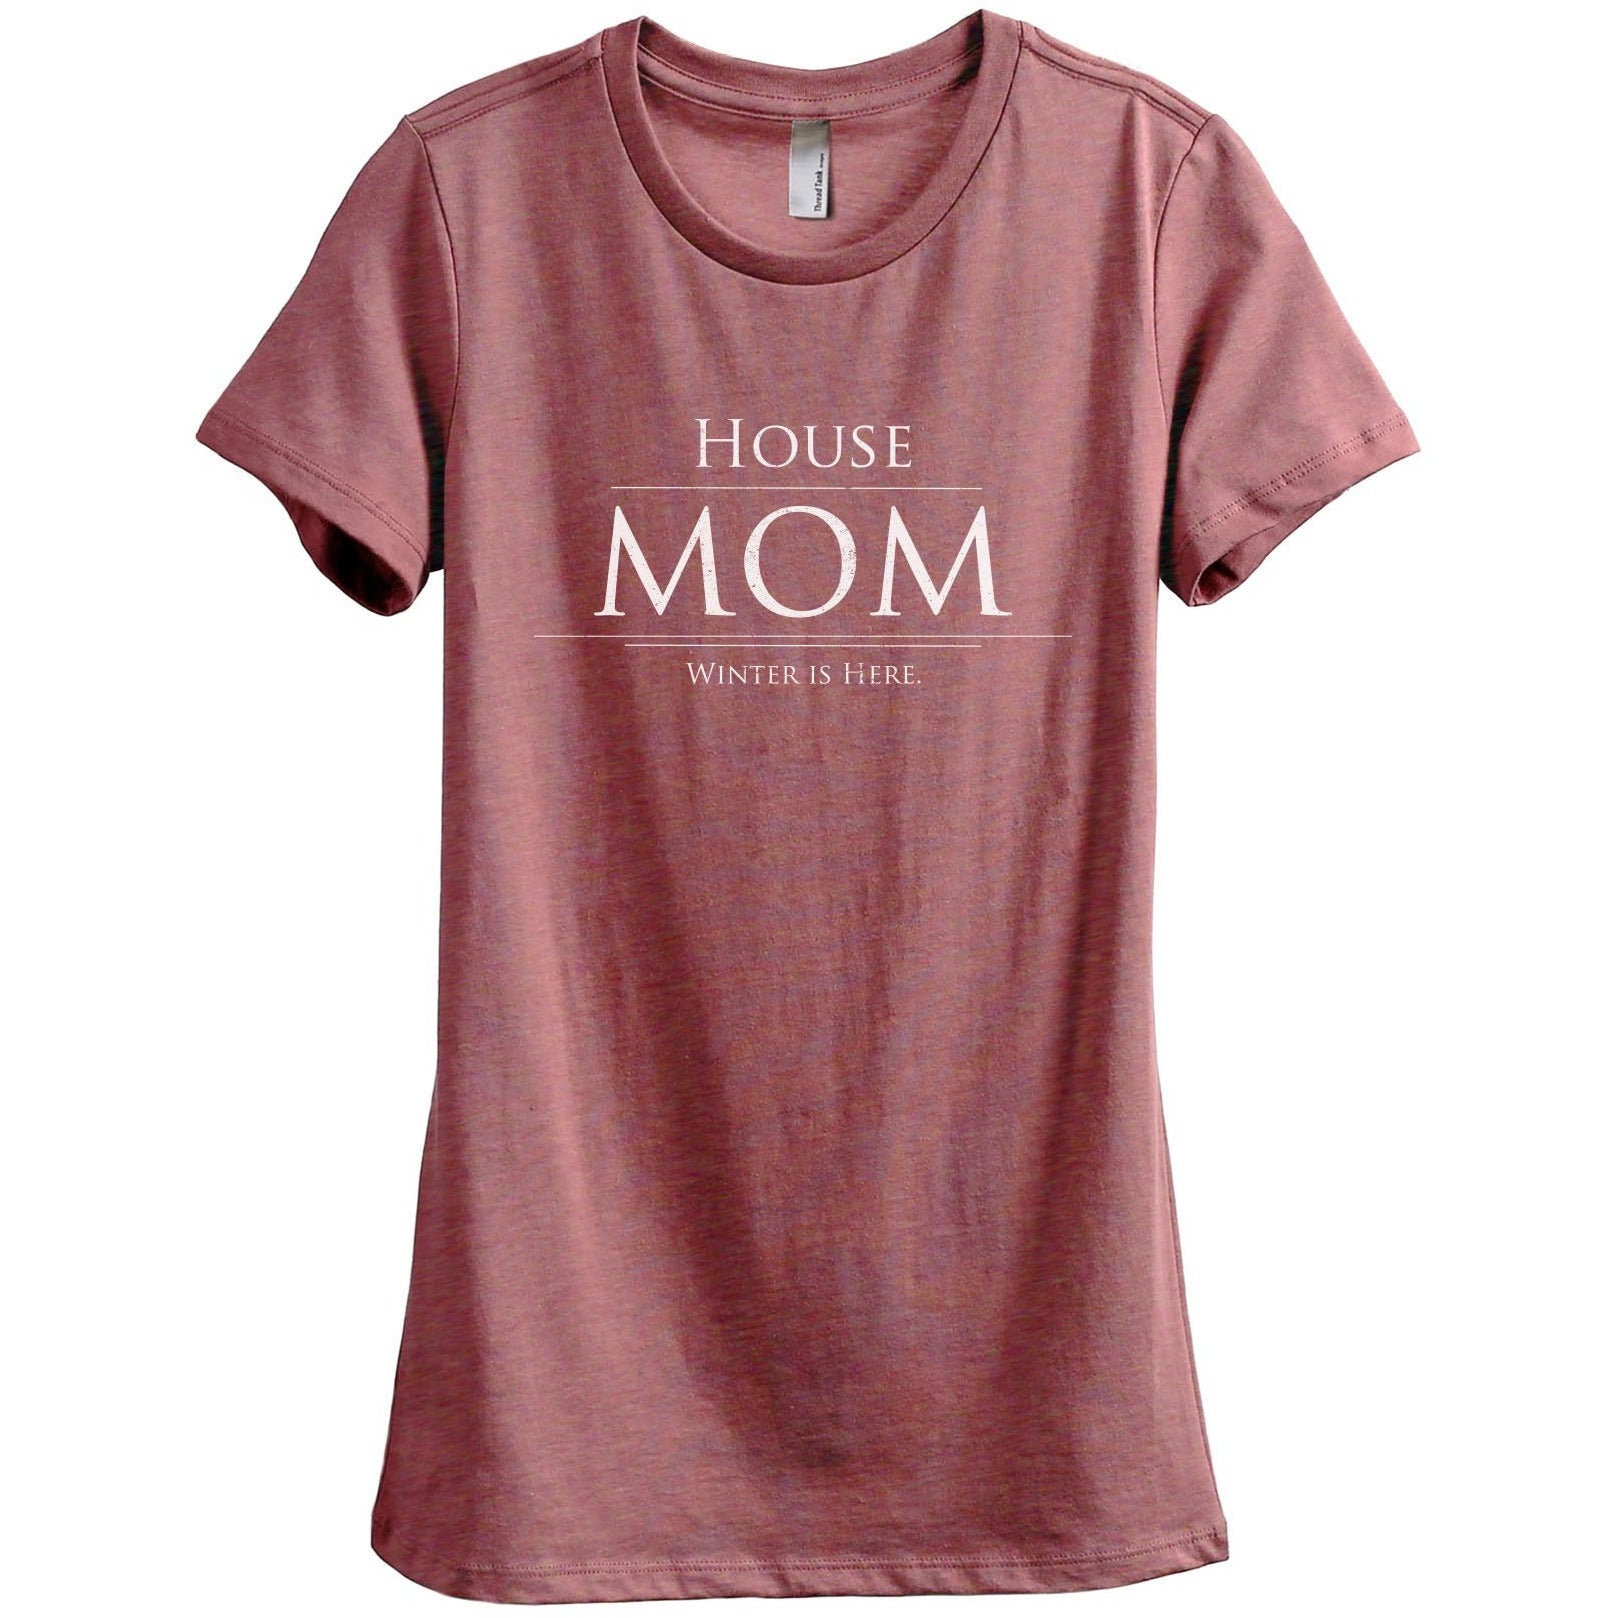 House Mom Winter Is Here Women's Relaxed Crewneck T-Shirt Top Tee Heather Rouge
